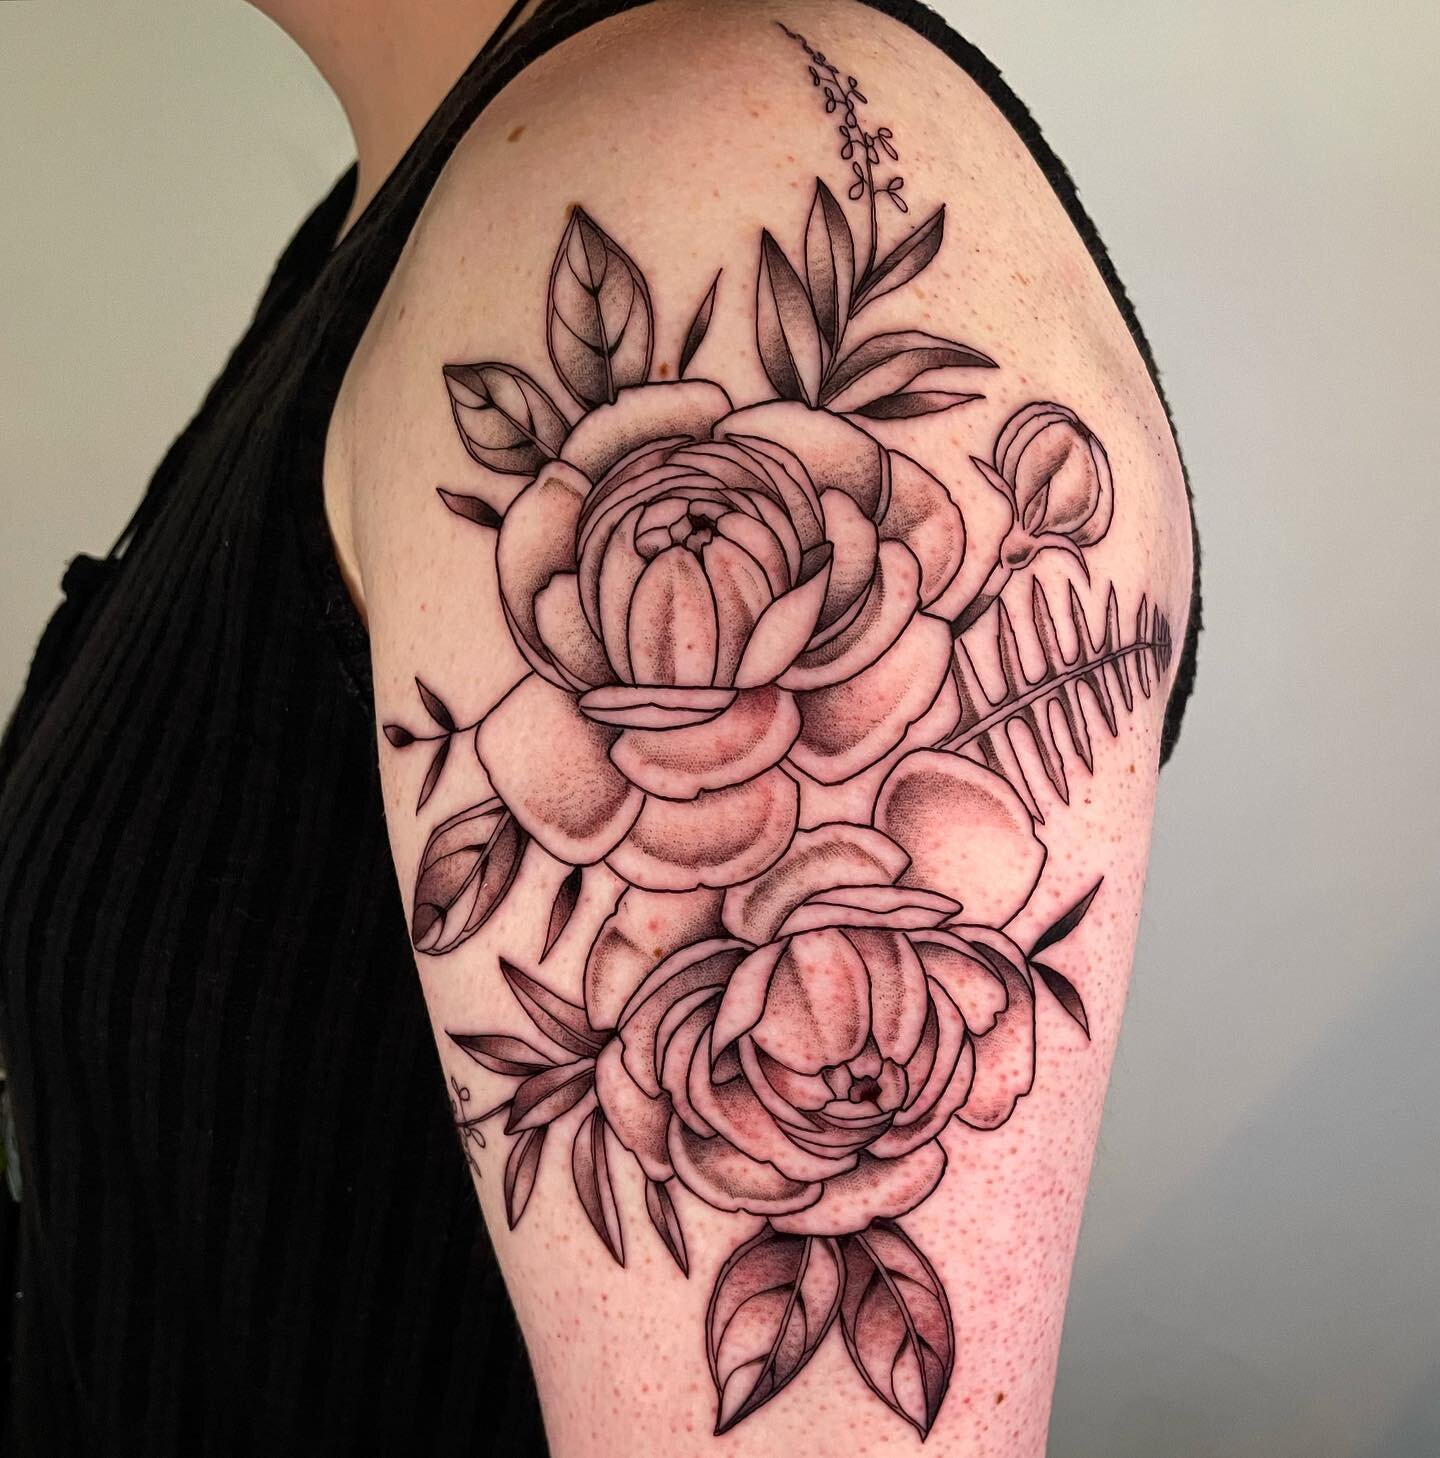 thank you again Cassidy 🌸 always a fun time working with you! 
.
.
.
.
.
.
.
.
#eugenetattoo #eugeneoregon #eugene #oregon #oregontattoo #pnw #pnwtattoo #floraltattoo #botanicaltattoo #illustrativetattoo